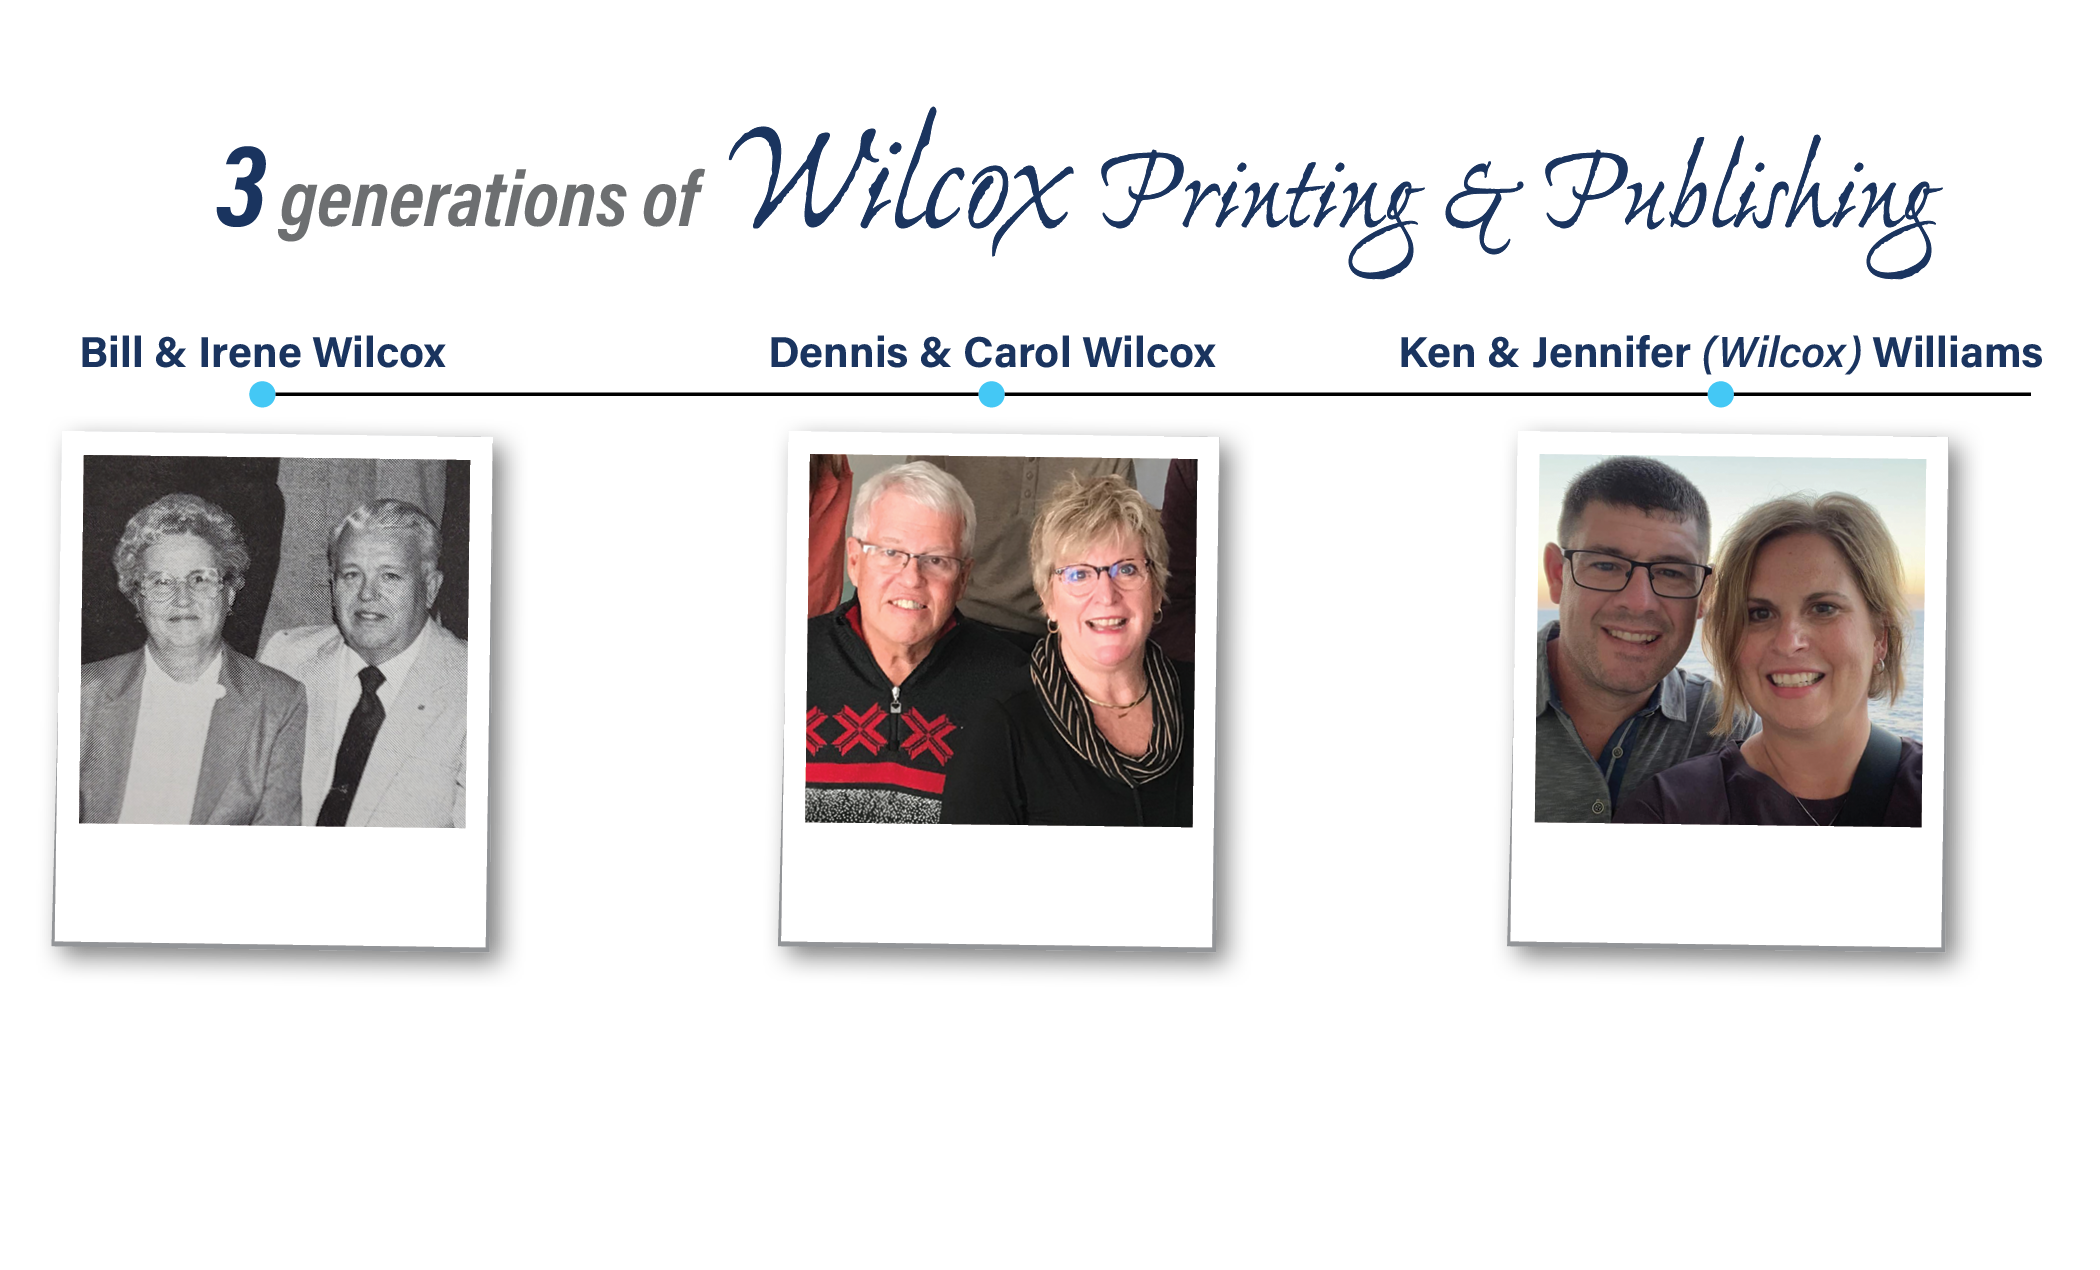 Timeline showing the 3 generations of Wilcox Printing & Publishing